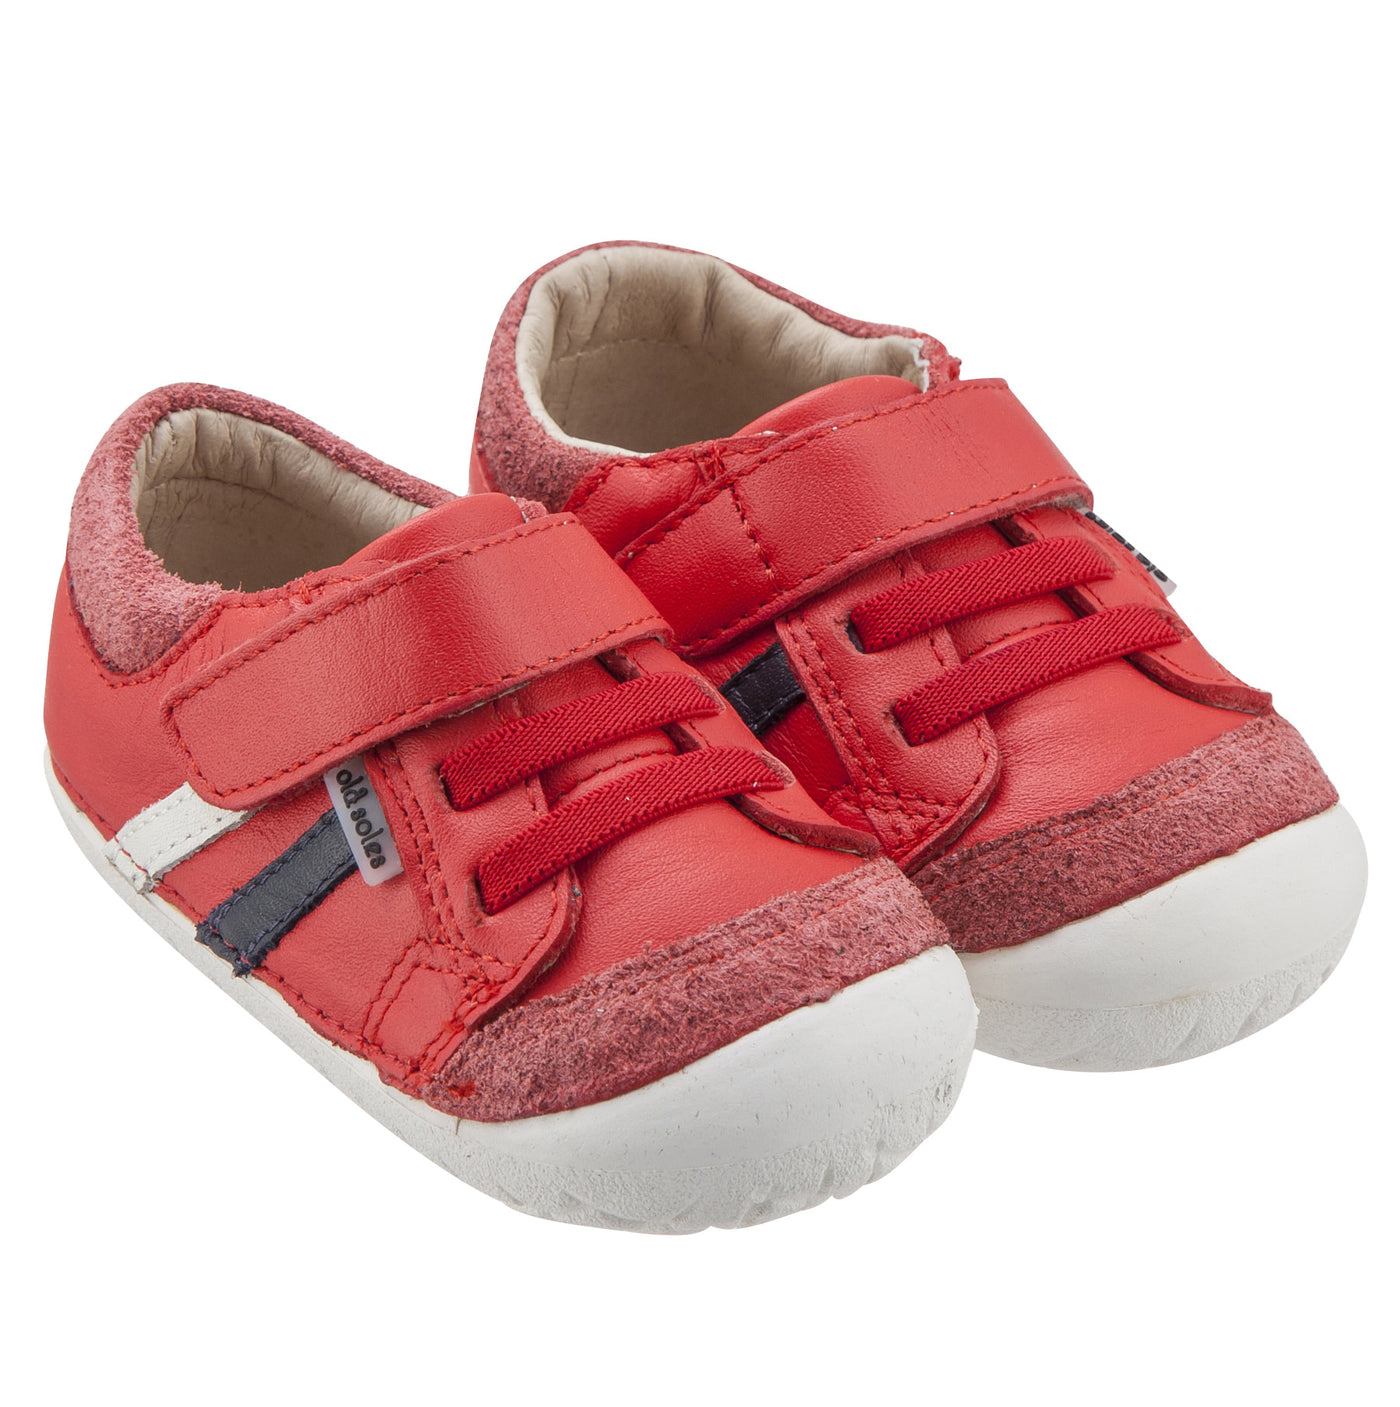 Old Soles Baby 4000 Pave Denzle Sneakers Shoes in Bright Red